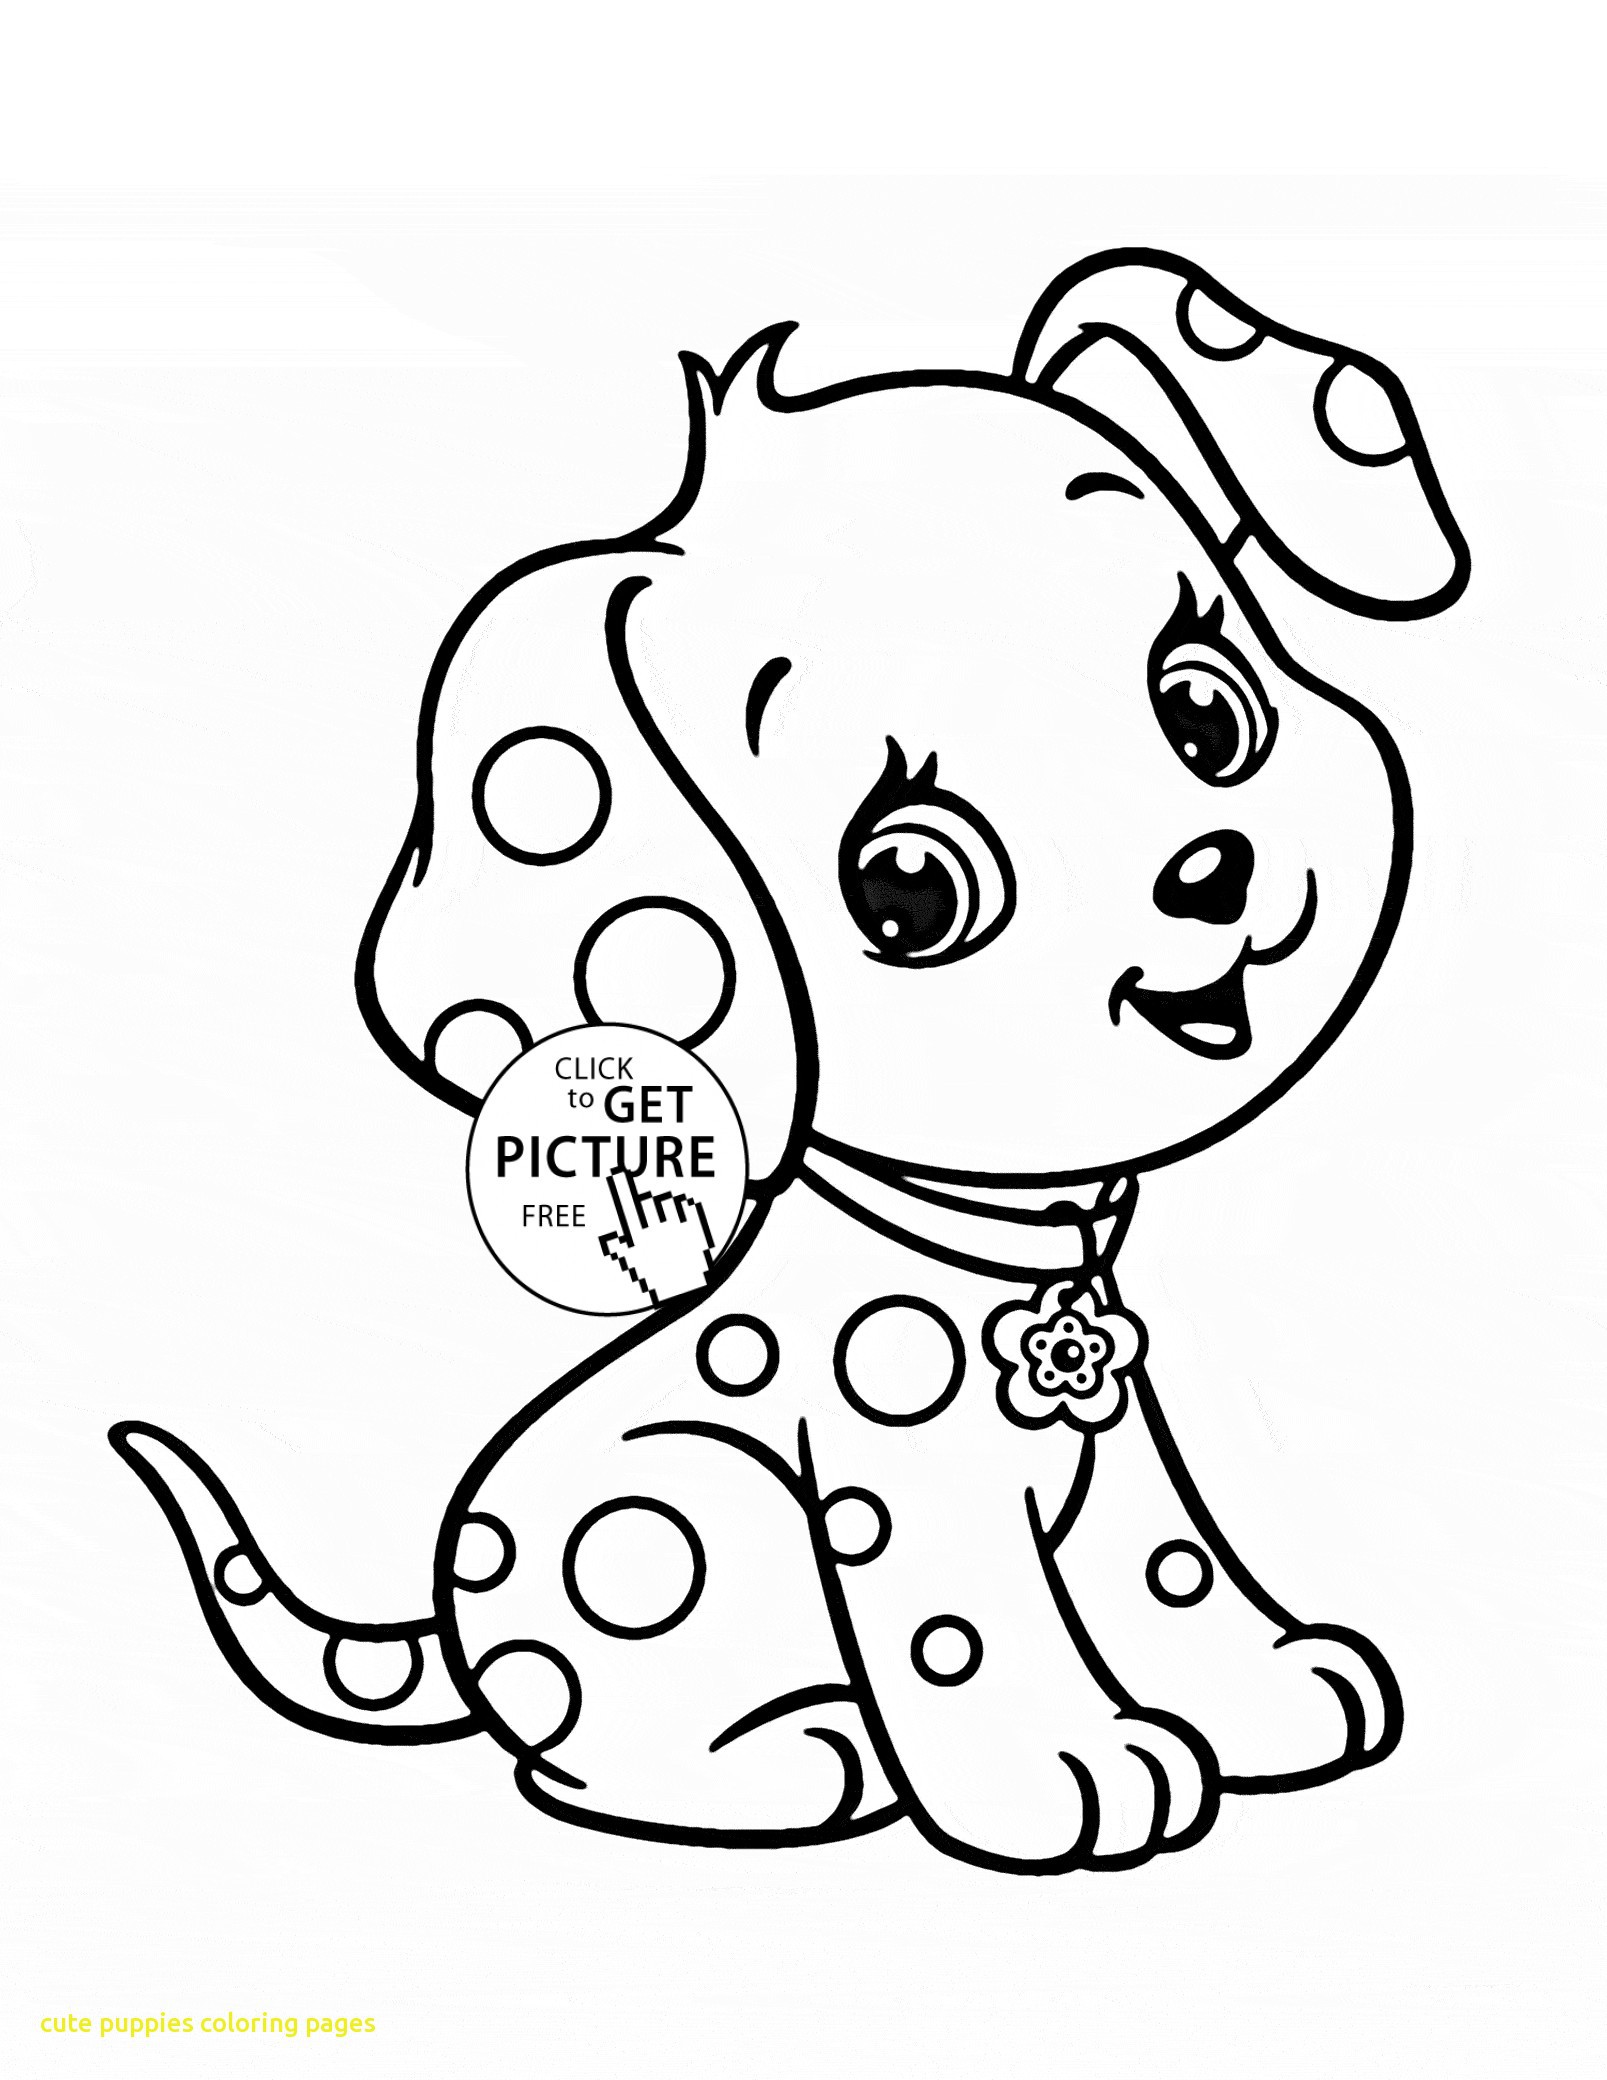 Adorable Puppy Coloring Pages